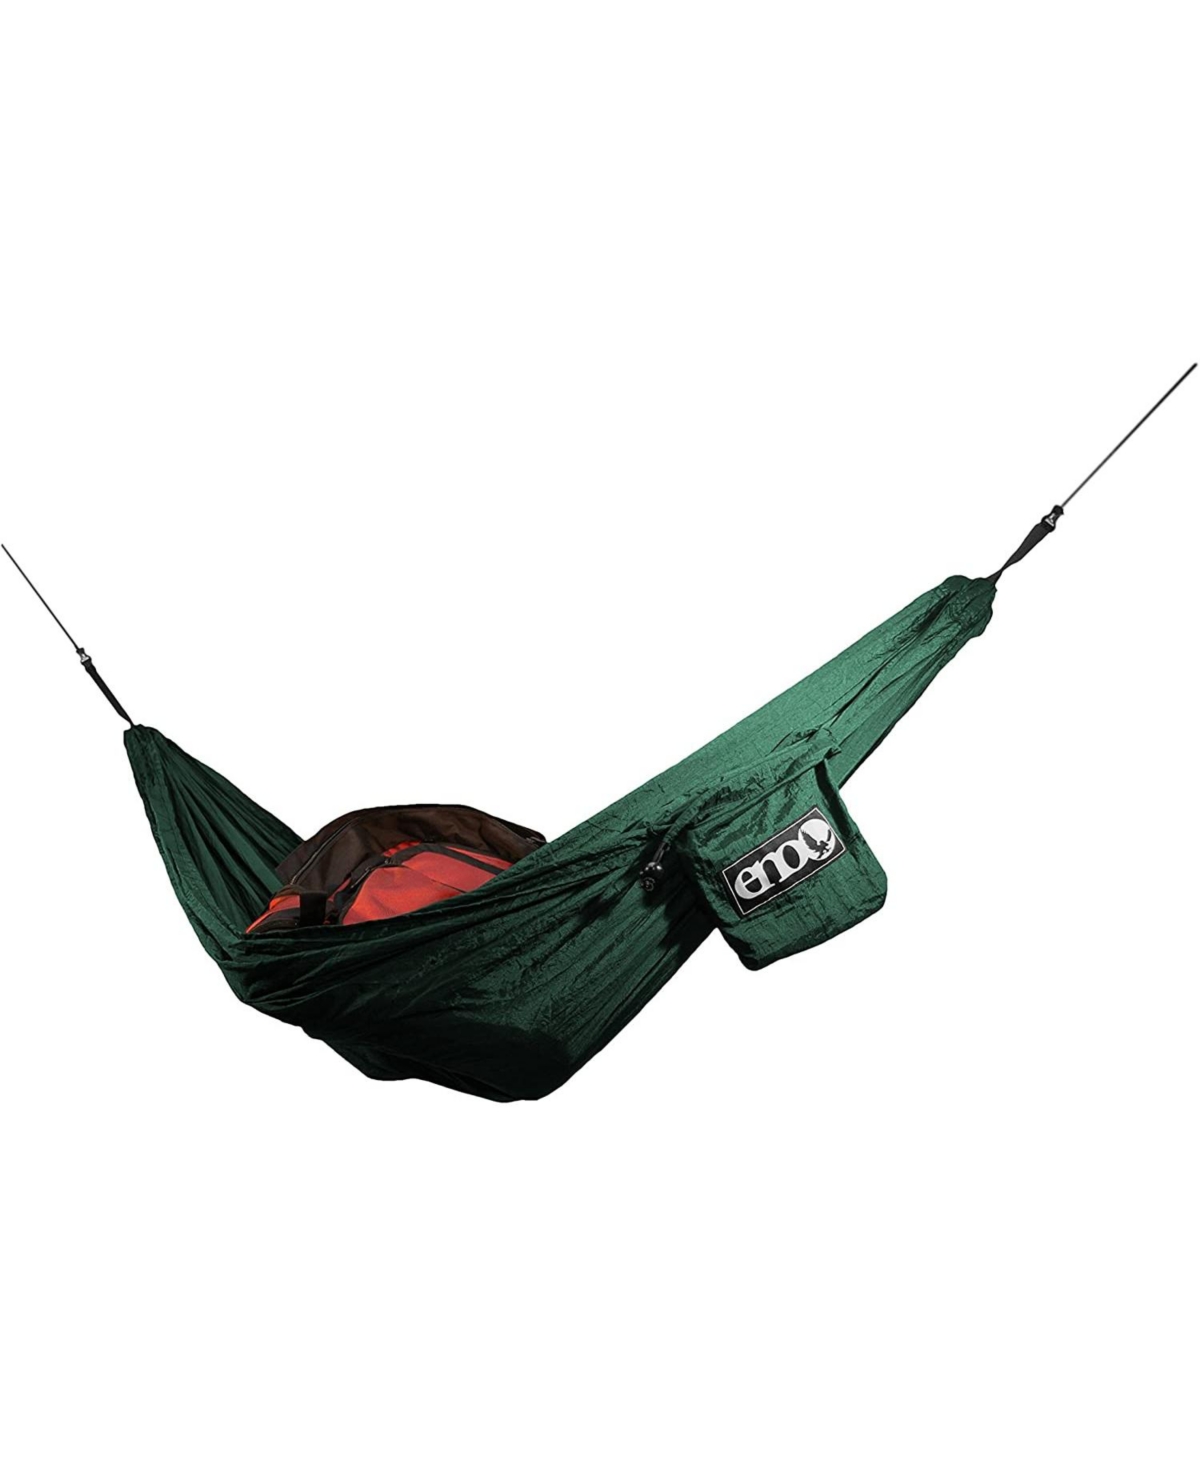 Underbelly Gear Sling - Storage Hammock for Portable Hammocks - For Hiking, Camping, Backpacking, Beach, Festivals, or Backyards - Forest - Forest